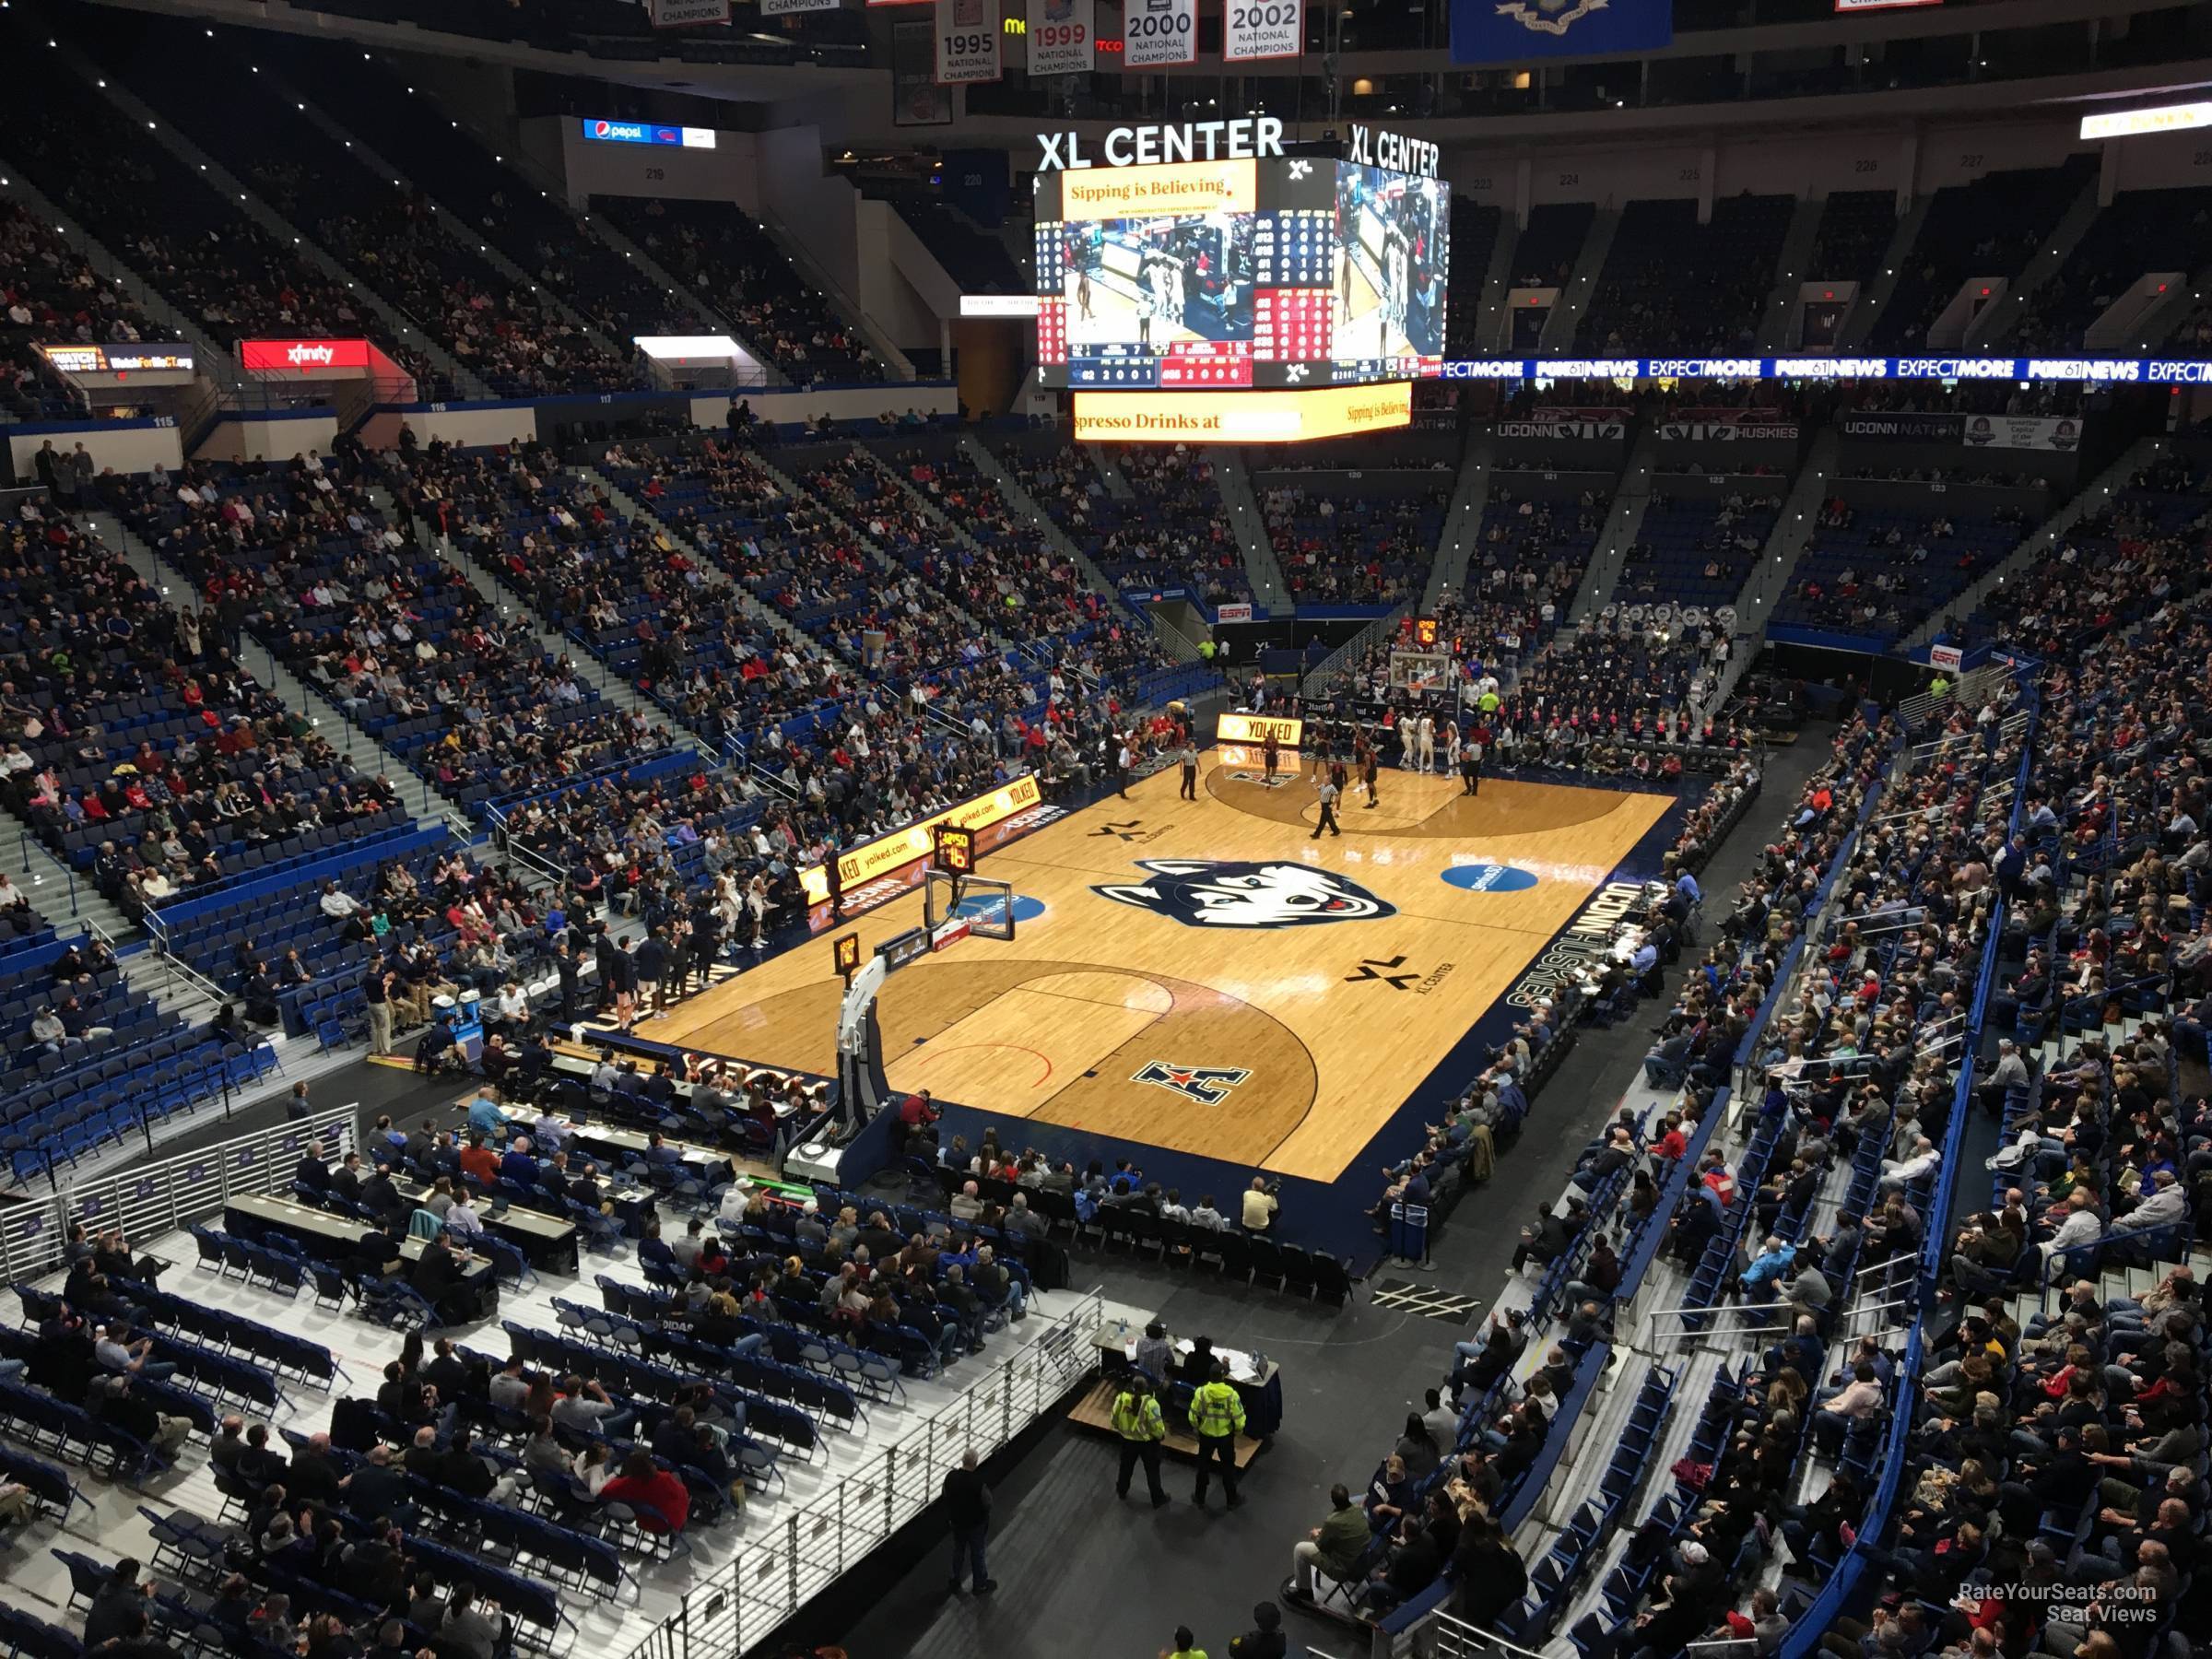 section 233, row a seat view  - xl center